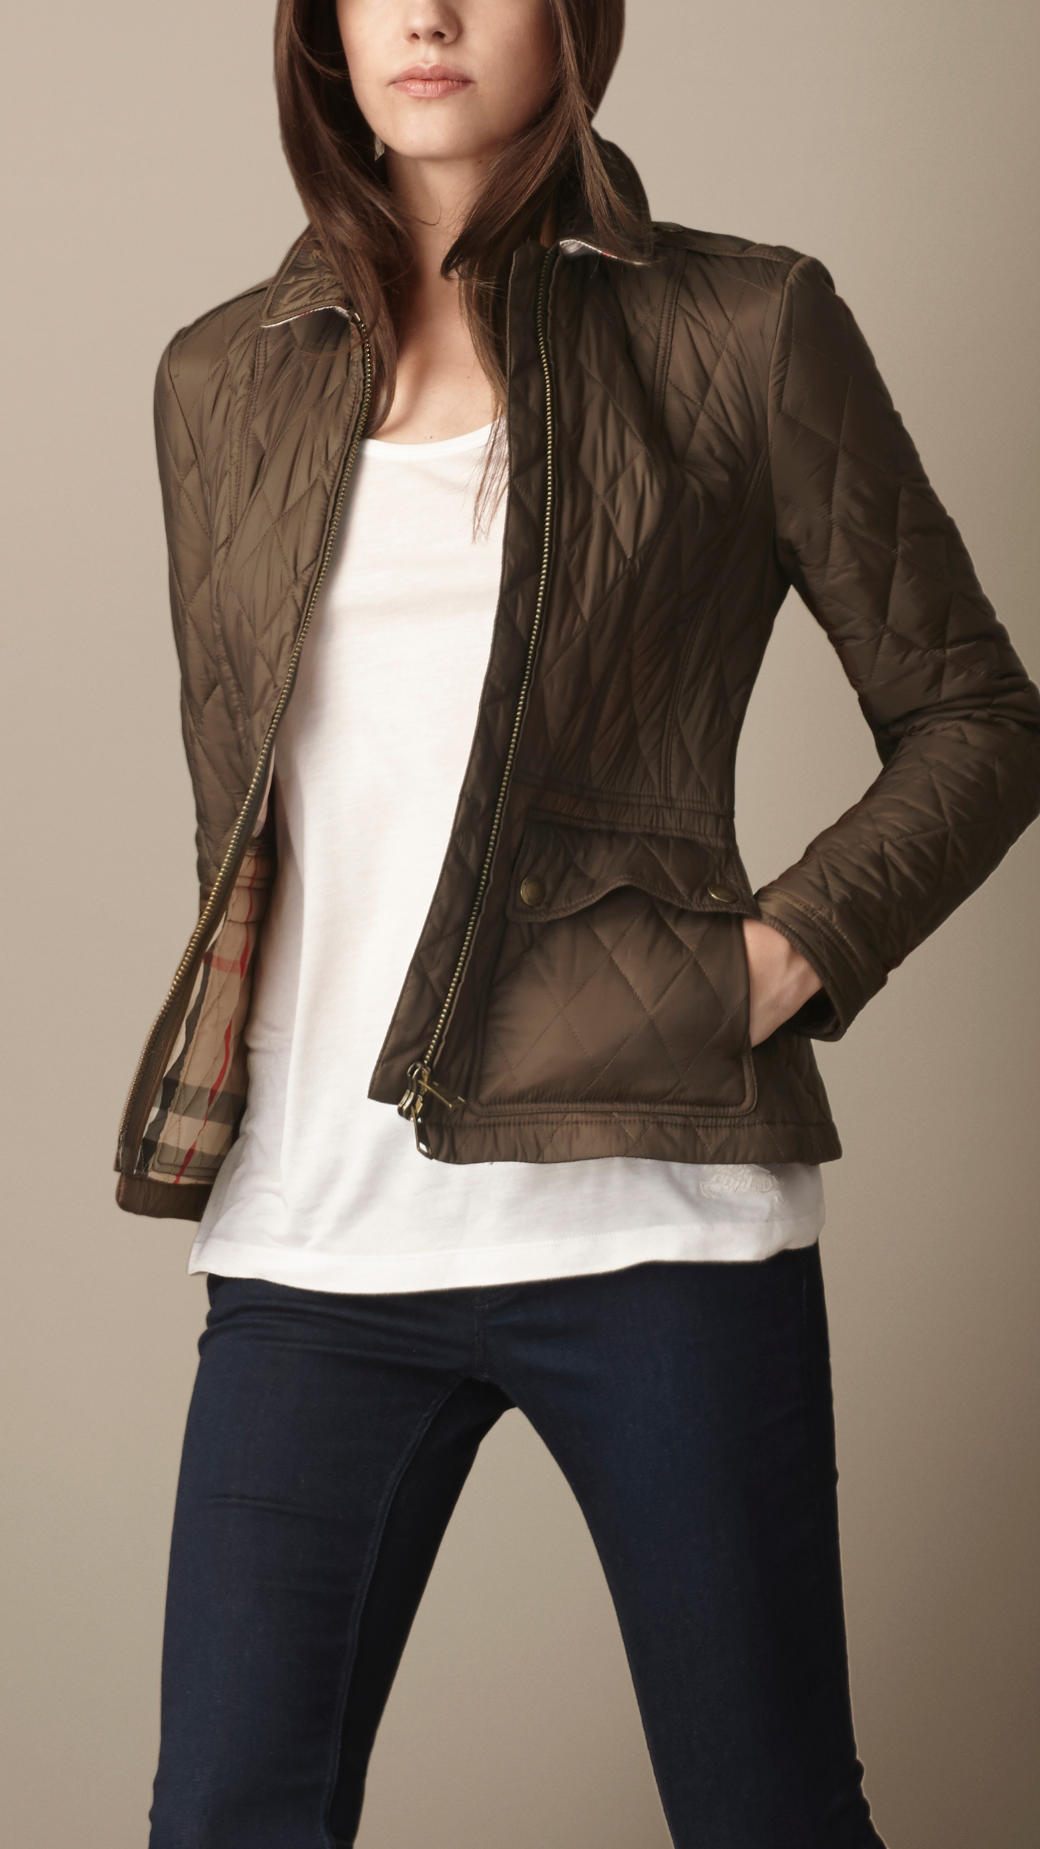 Lyst - Burberry Fitted Diamond Quilt Jacket in Brown